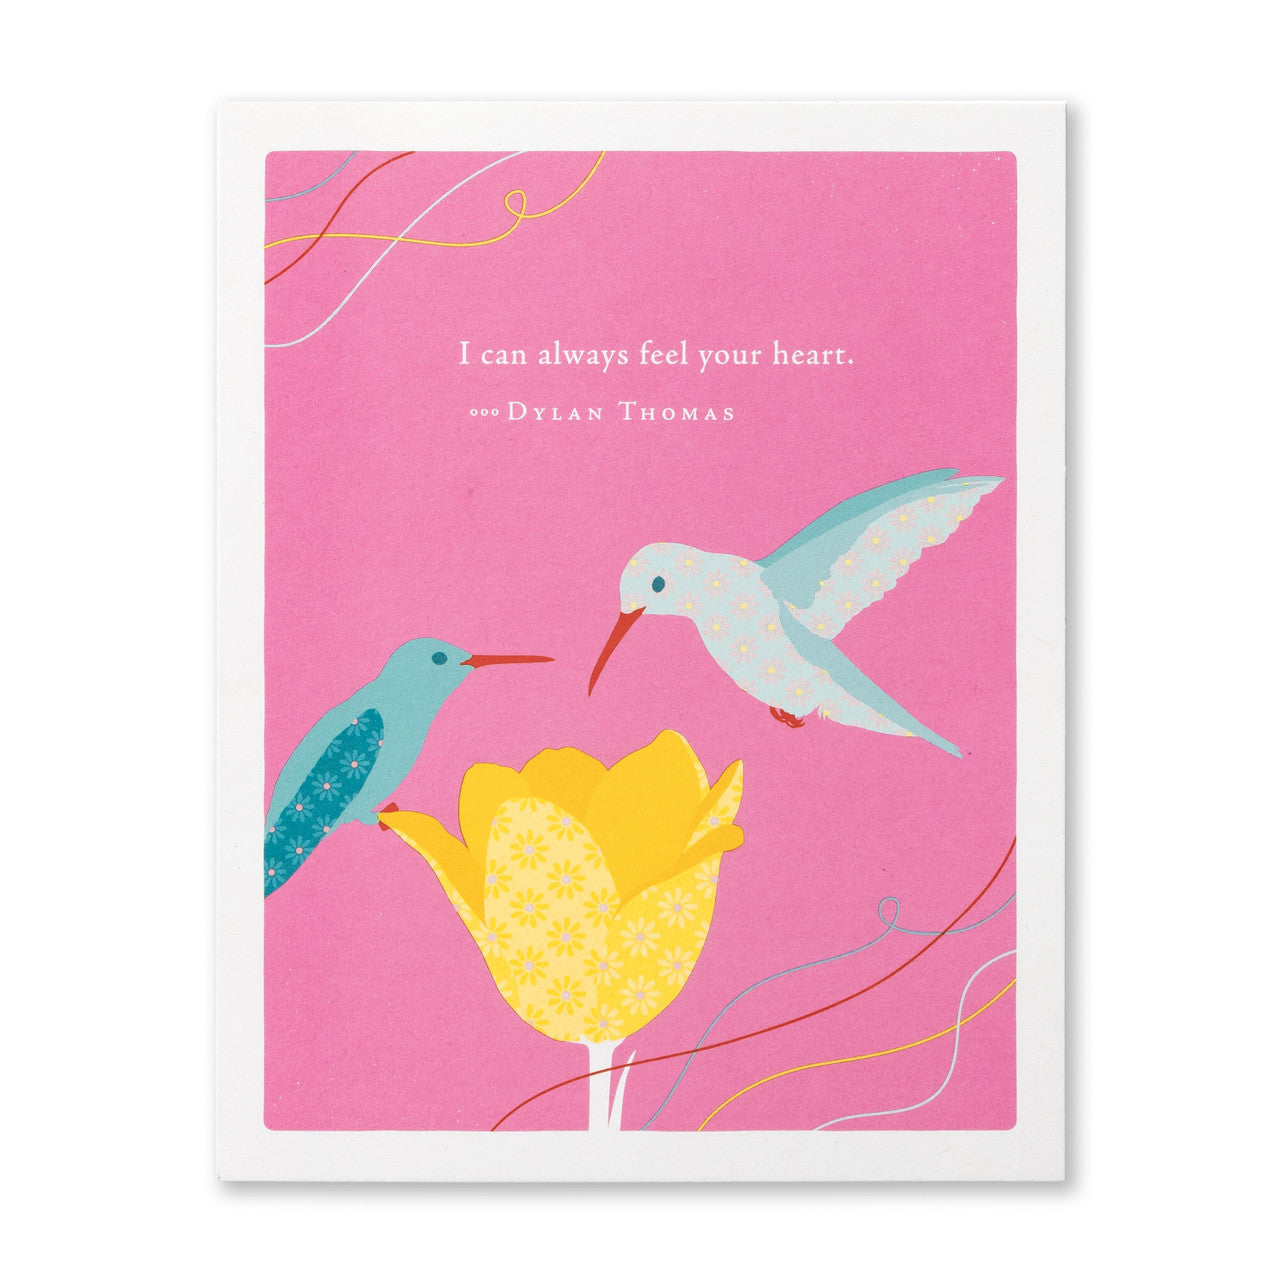 Mother's Day Card - “I CAN ALWAYS FEEL YOUR HEART.”